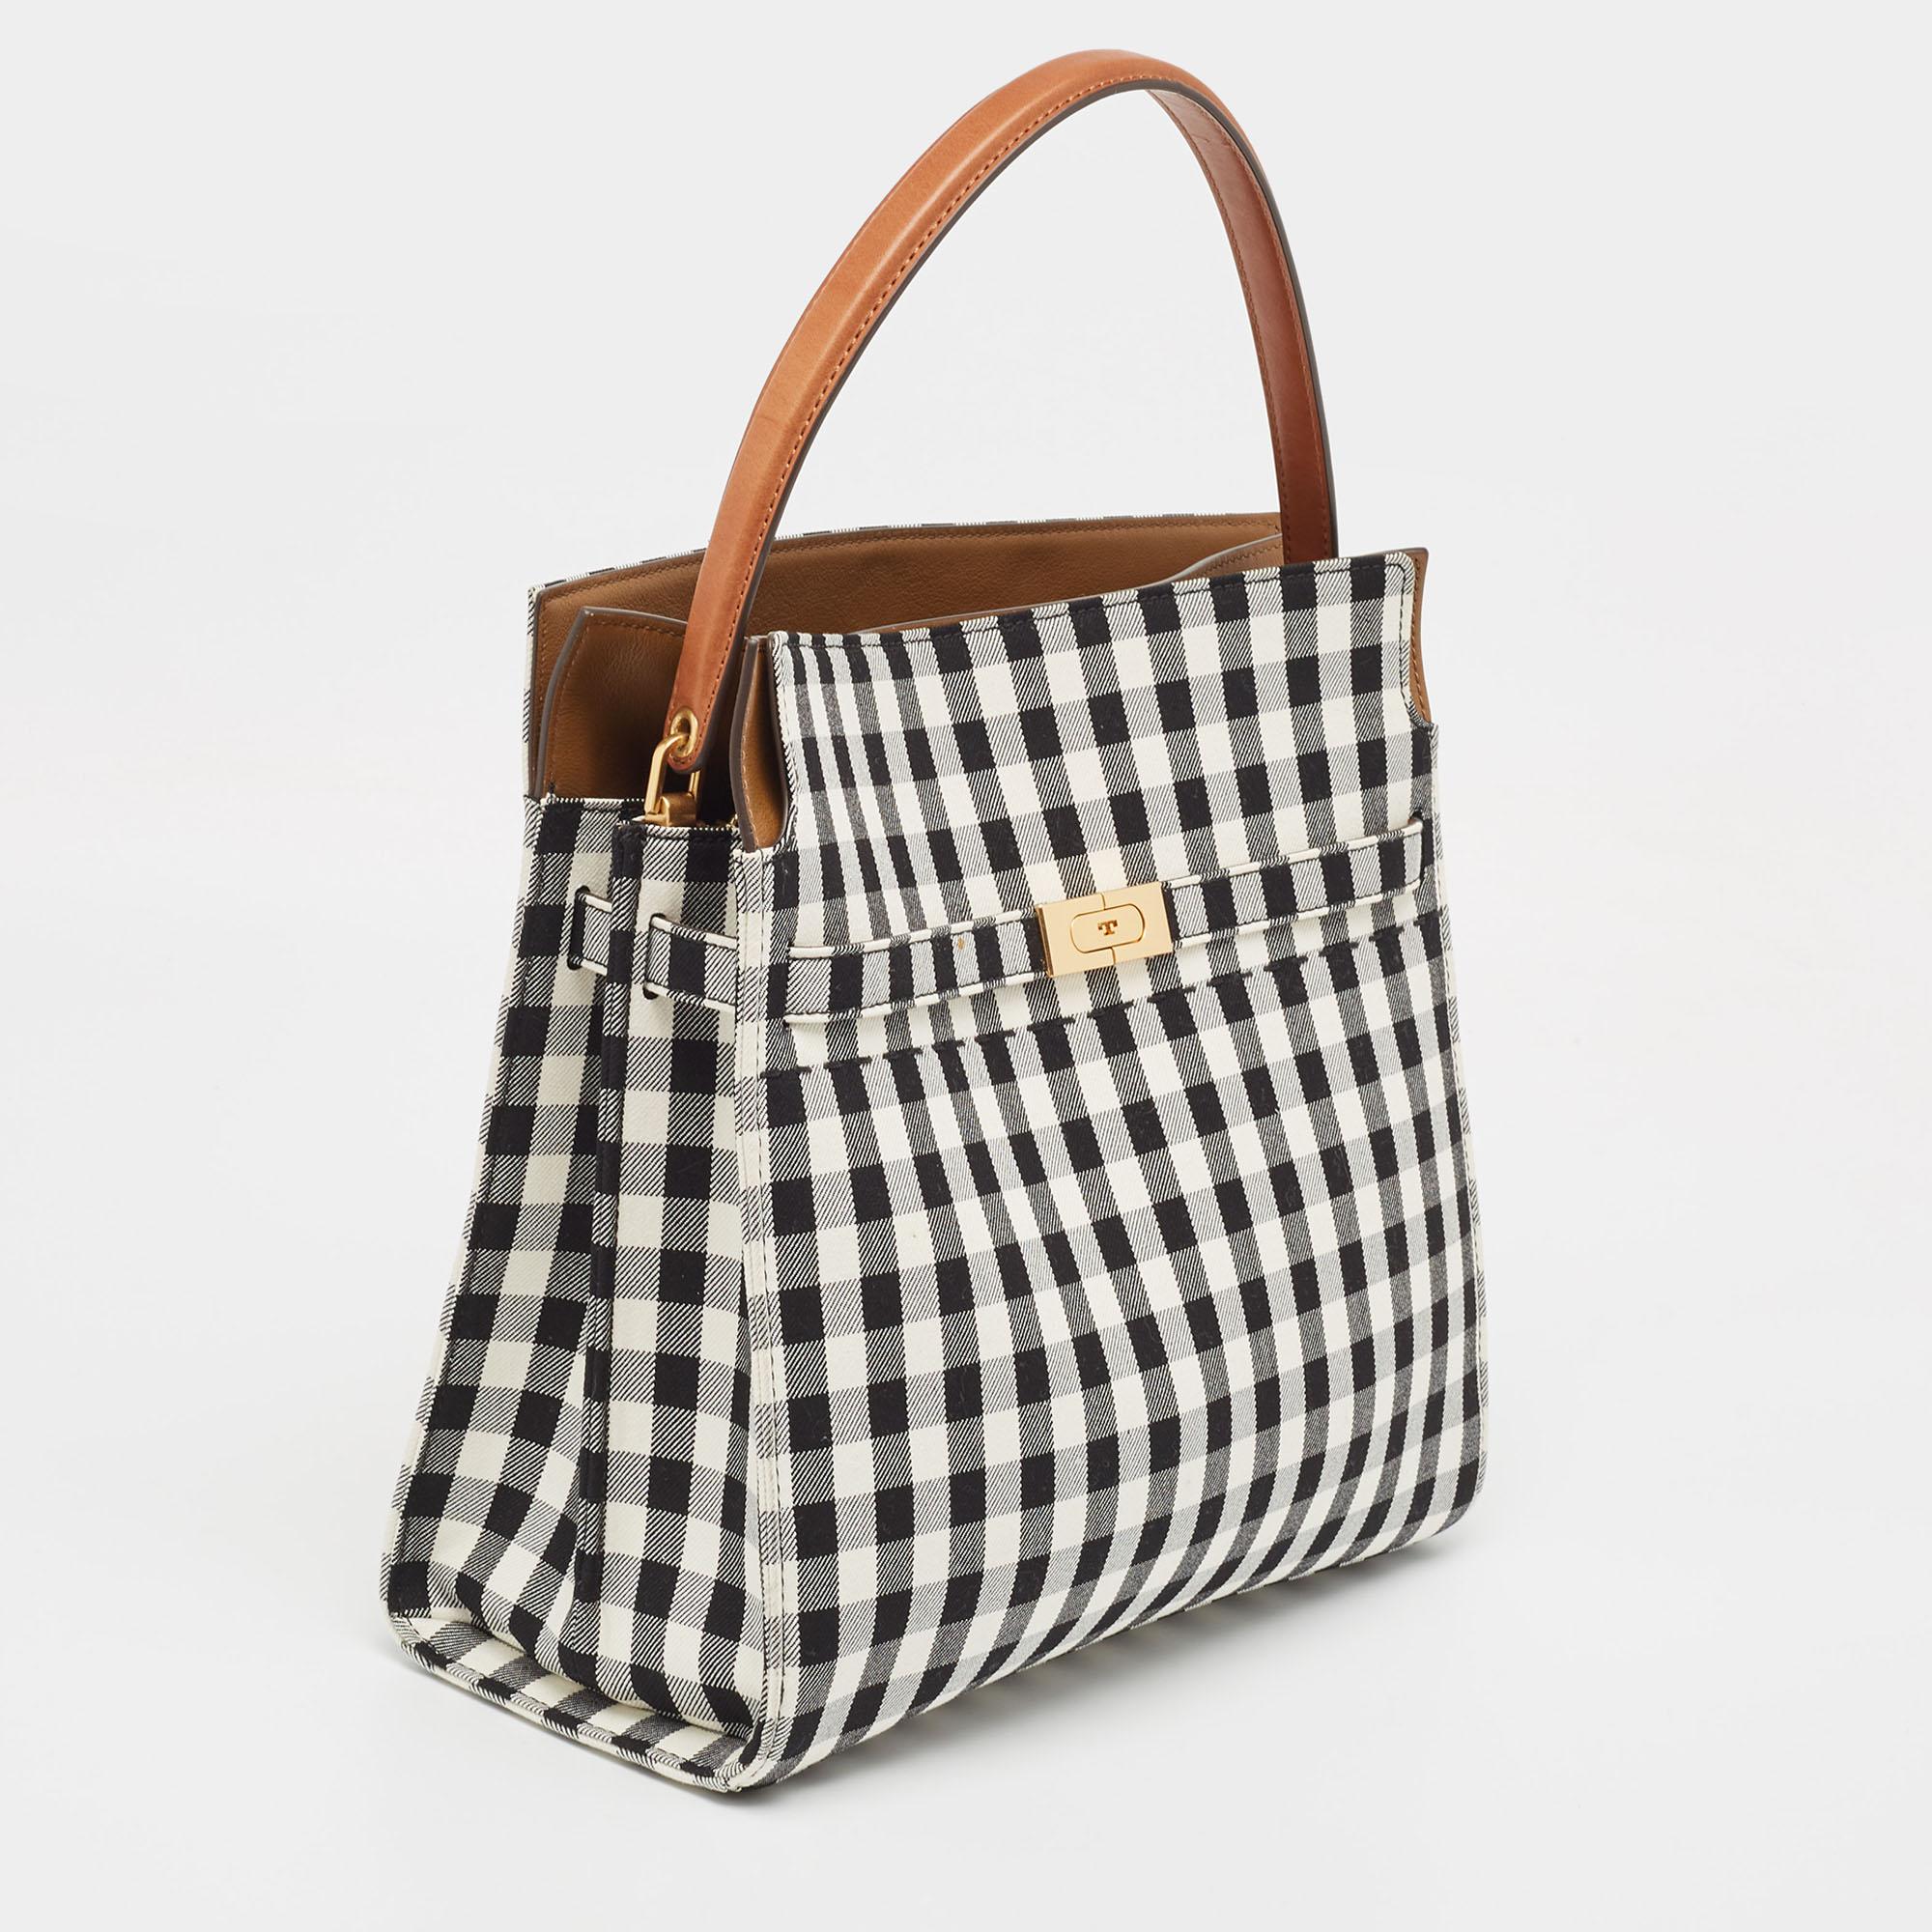 Tory Burch Black/White Checkered Canvas Lee Radziwill Top Handle Bag For Sale 7